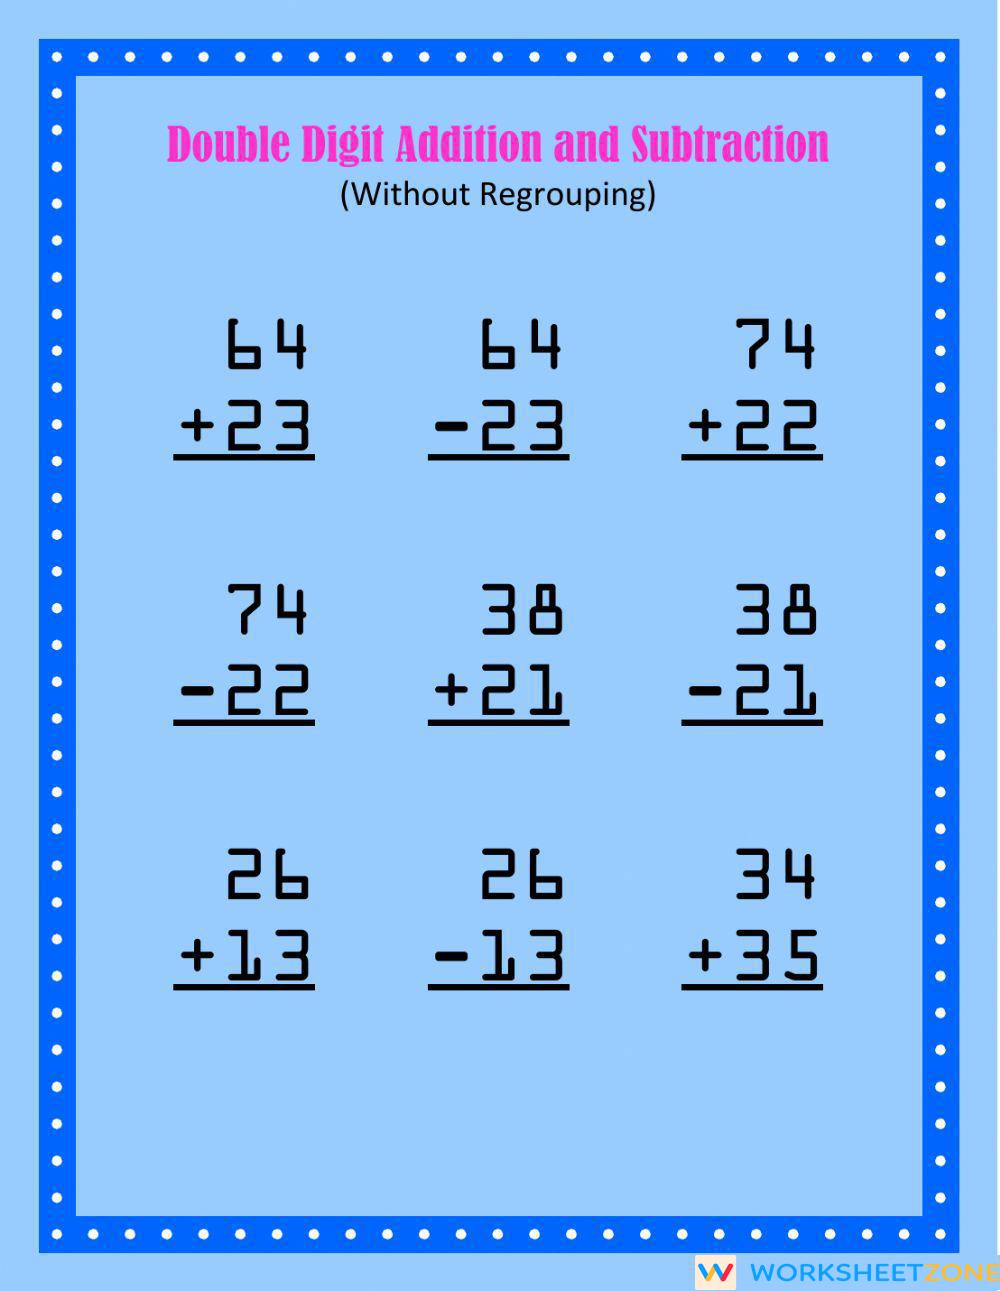 double-digit-addition-and-subtraction-set-2